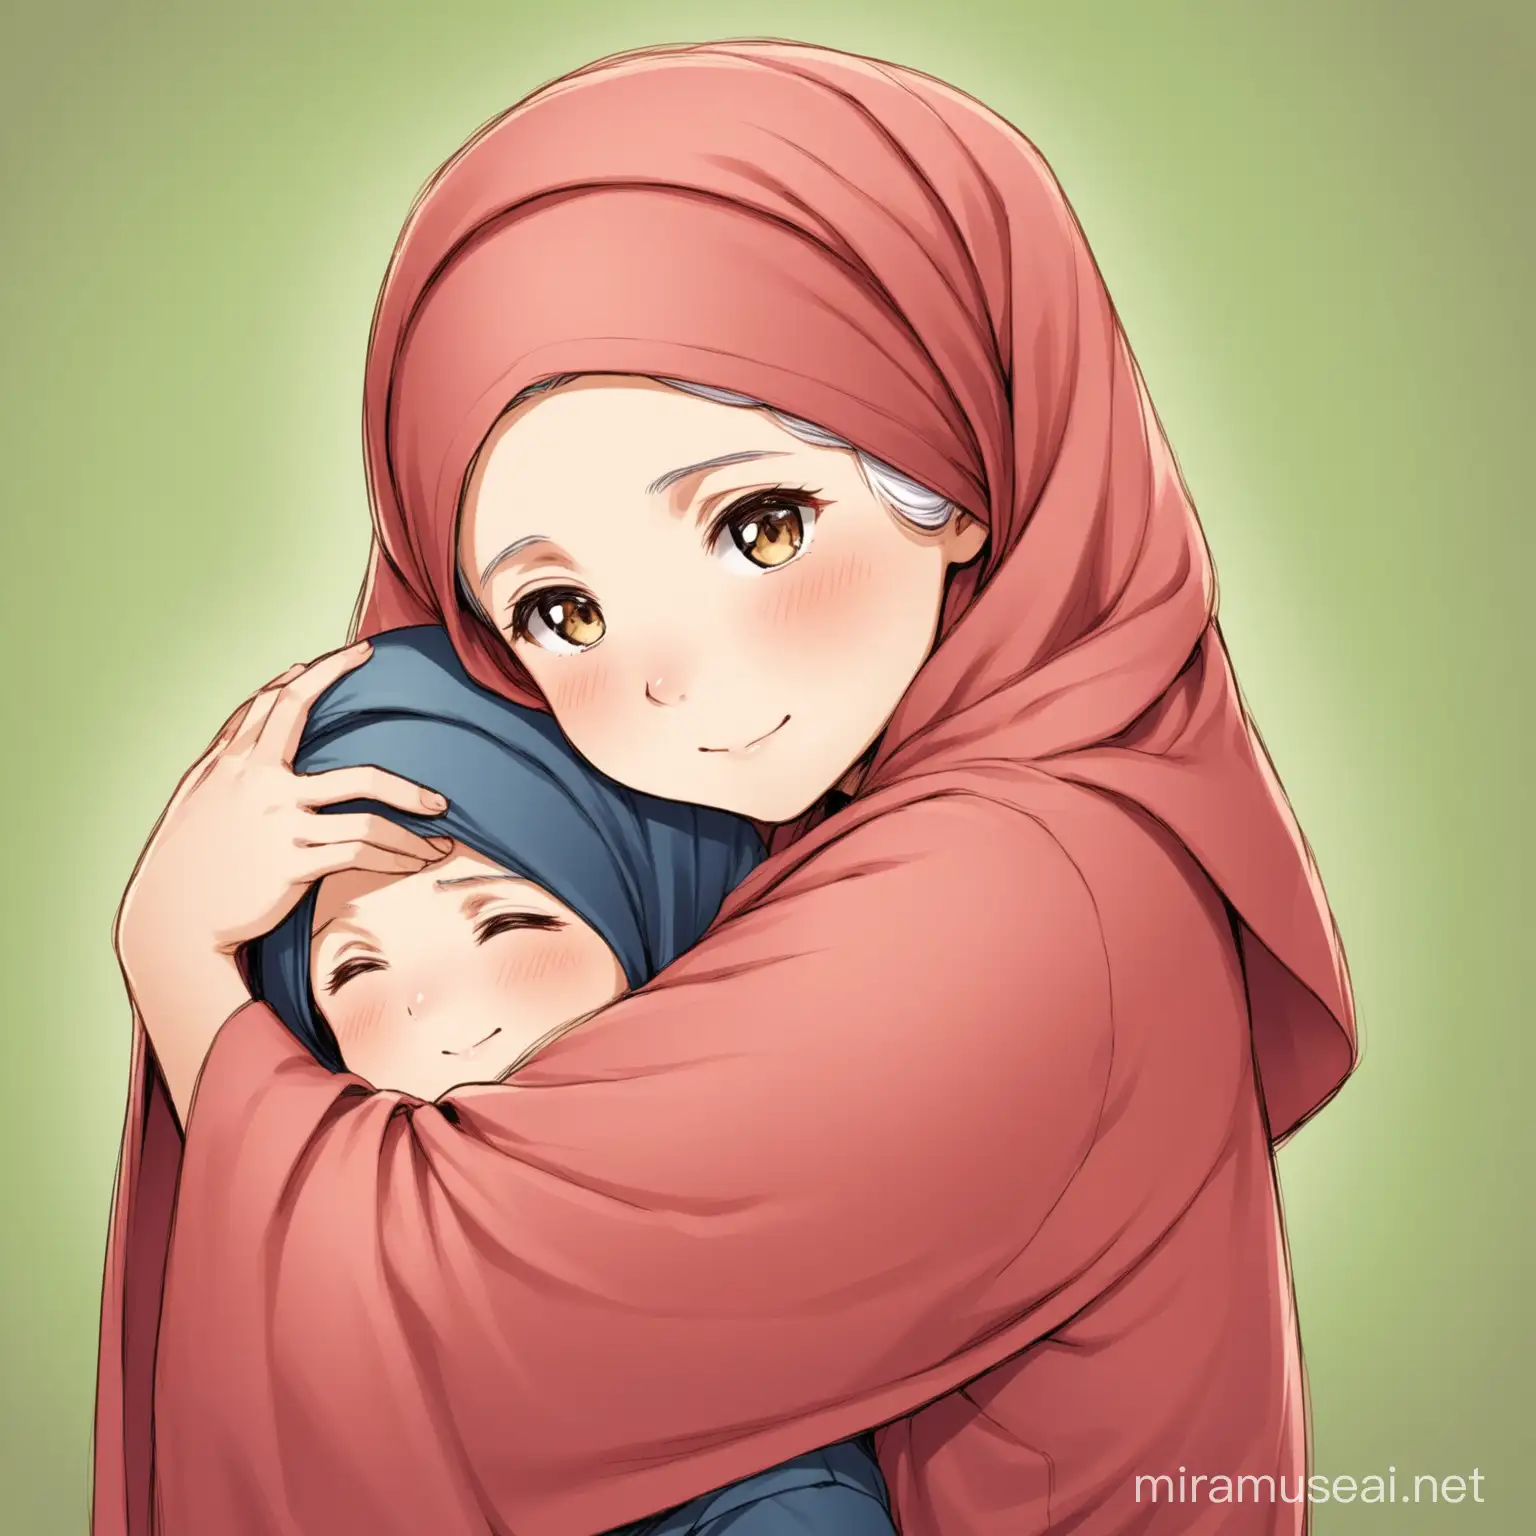 A' GIRL covers her hair with a headscarf' to avoid being seen and hugs her' grandmother.'